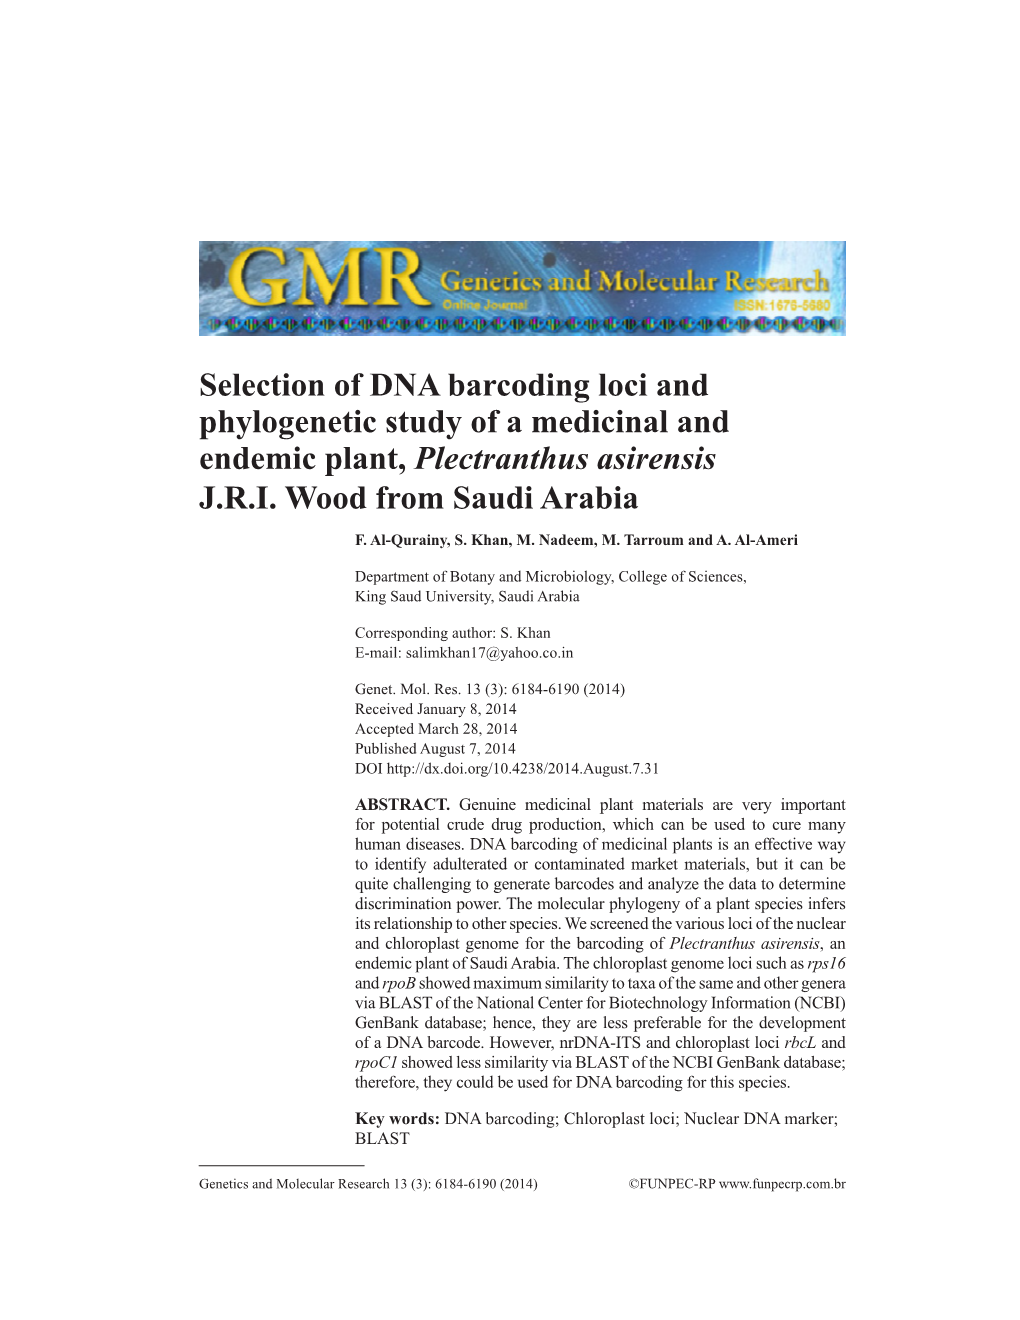 Selection of DNA Barcoding Loci and Phylogenetic Study of a Medicinal and Endemic Plant, Plectranthus Asirensis J.R.I